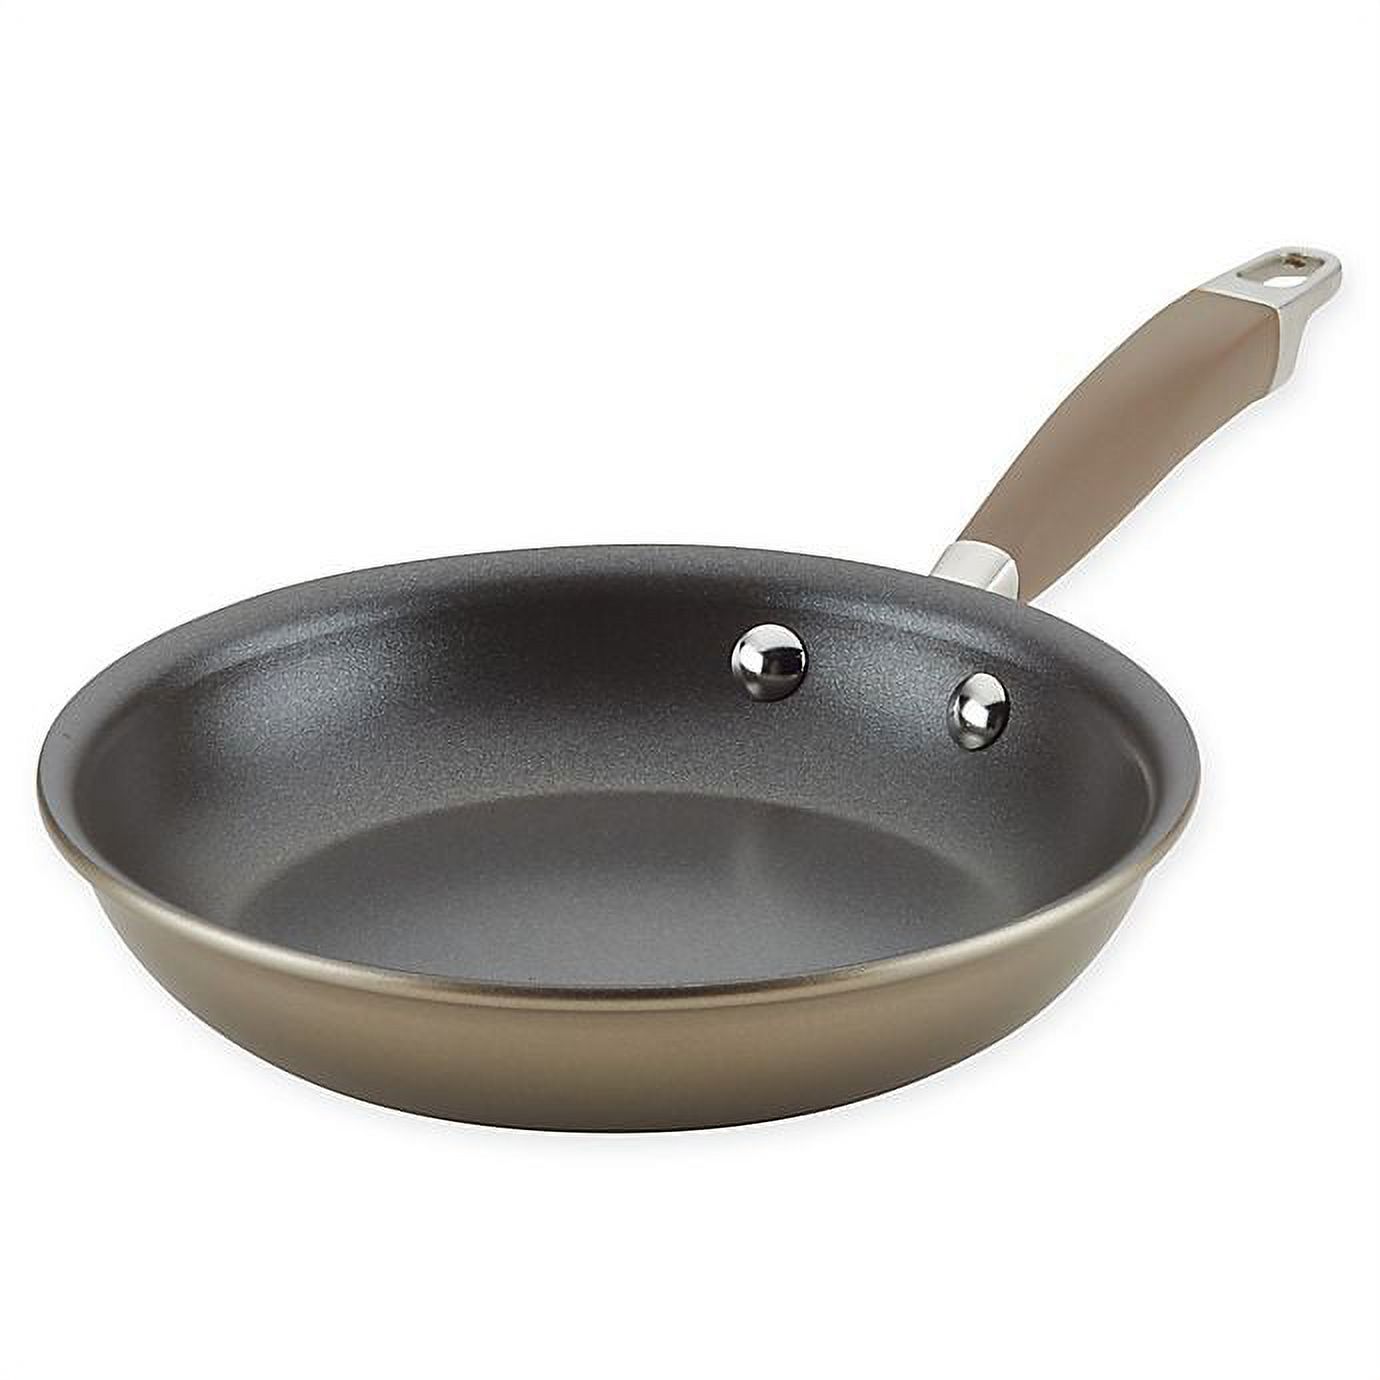 Anolon Advanced Home Hard-Anodized 8.5″ Nonstick Skillet – Moonstone - image 1 of 5